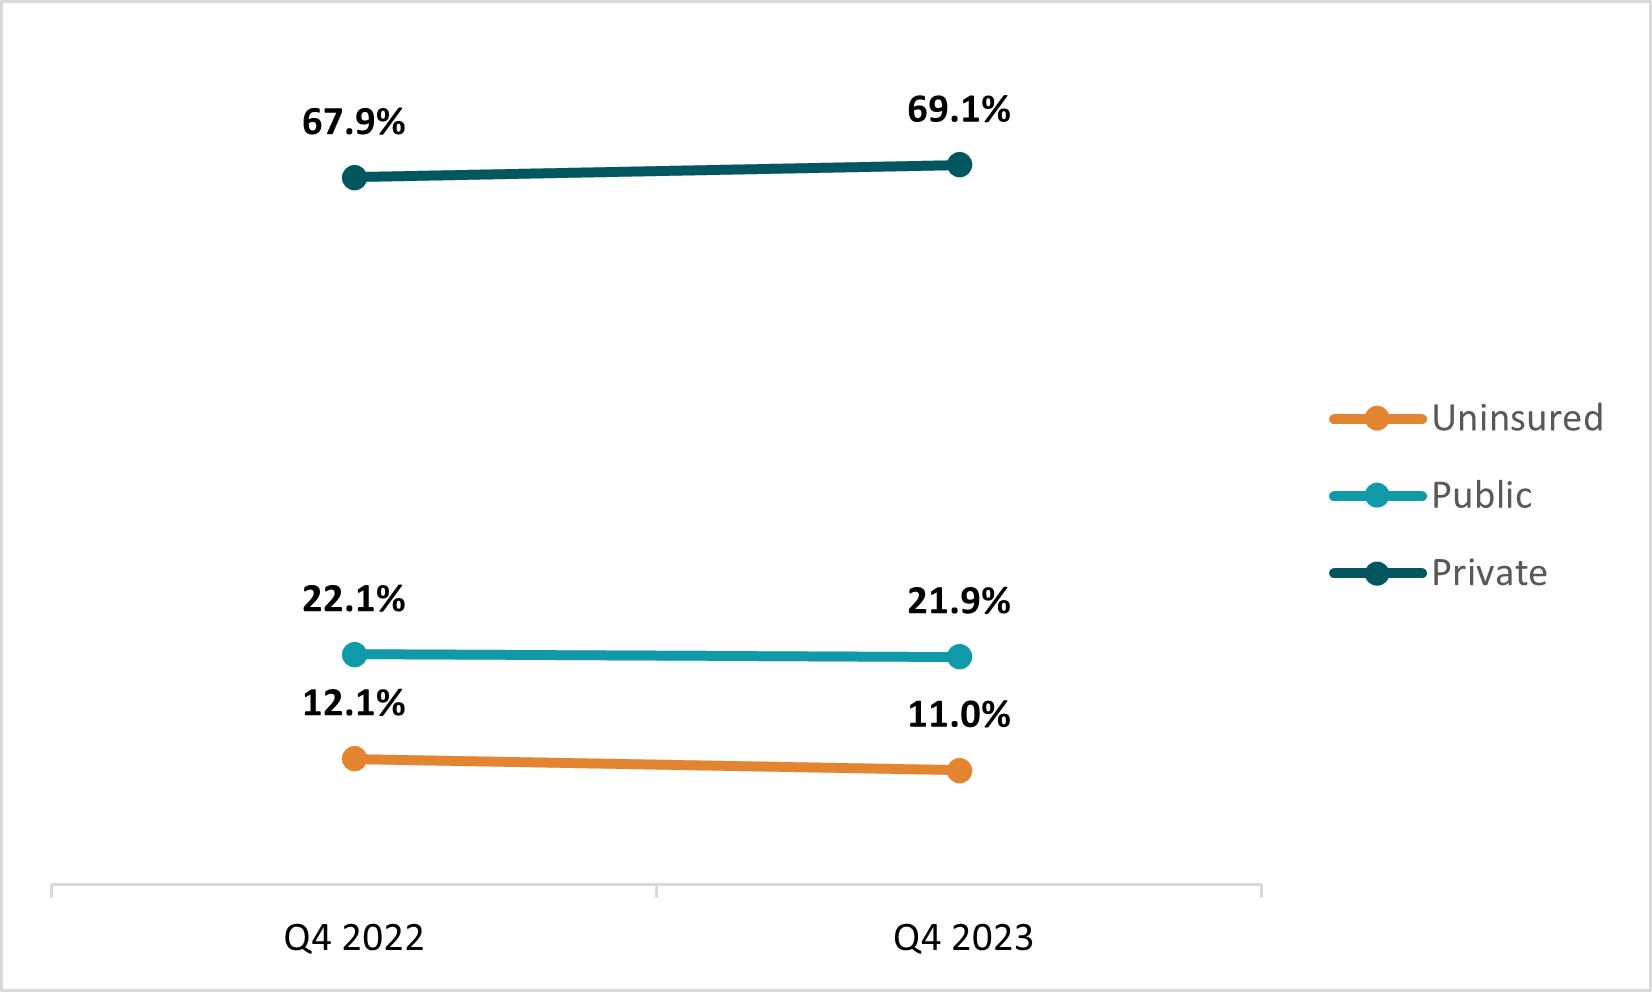 health insurance coverage rates graph showing national health interview survey data from q4 2022 vs q4 2023 with no statistically significant changes